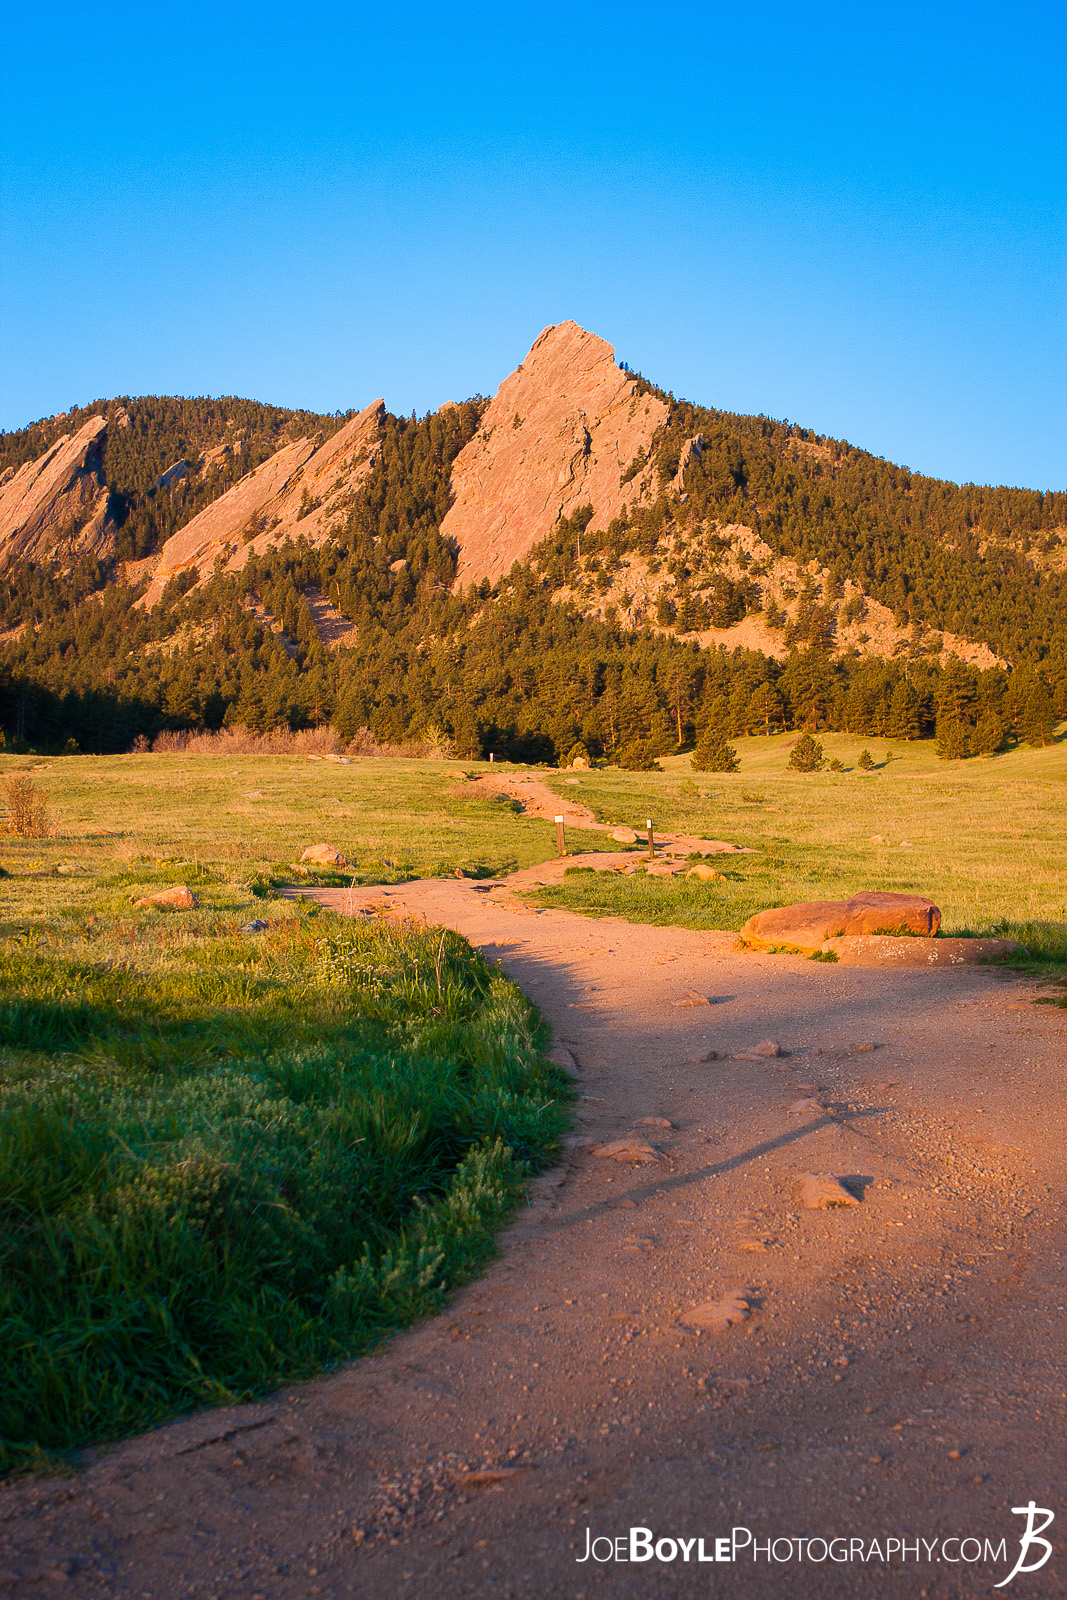  I made a stop over to Boulder, Colorado to check out the flatirons in Chautauqua State Park. I'm thankful there was a beautiful sunrise to draw the beauty out of the park and mountains! 